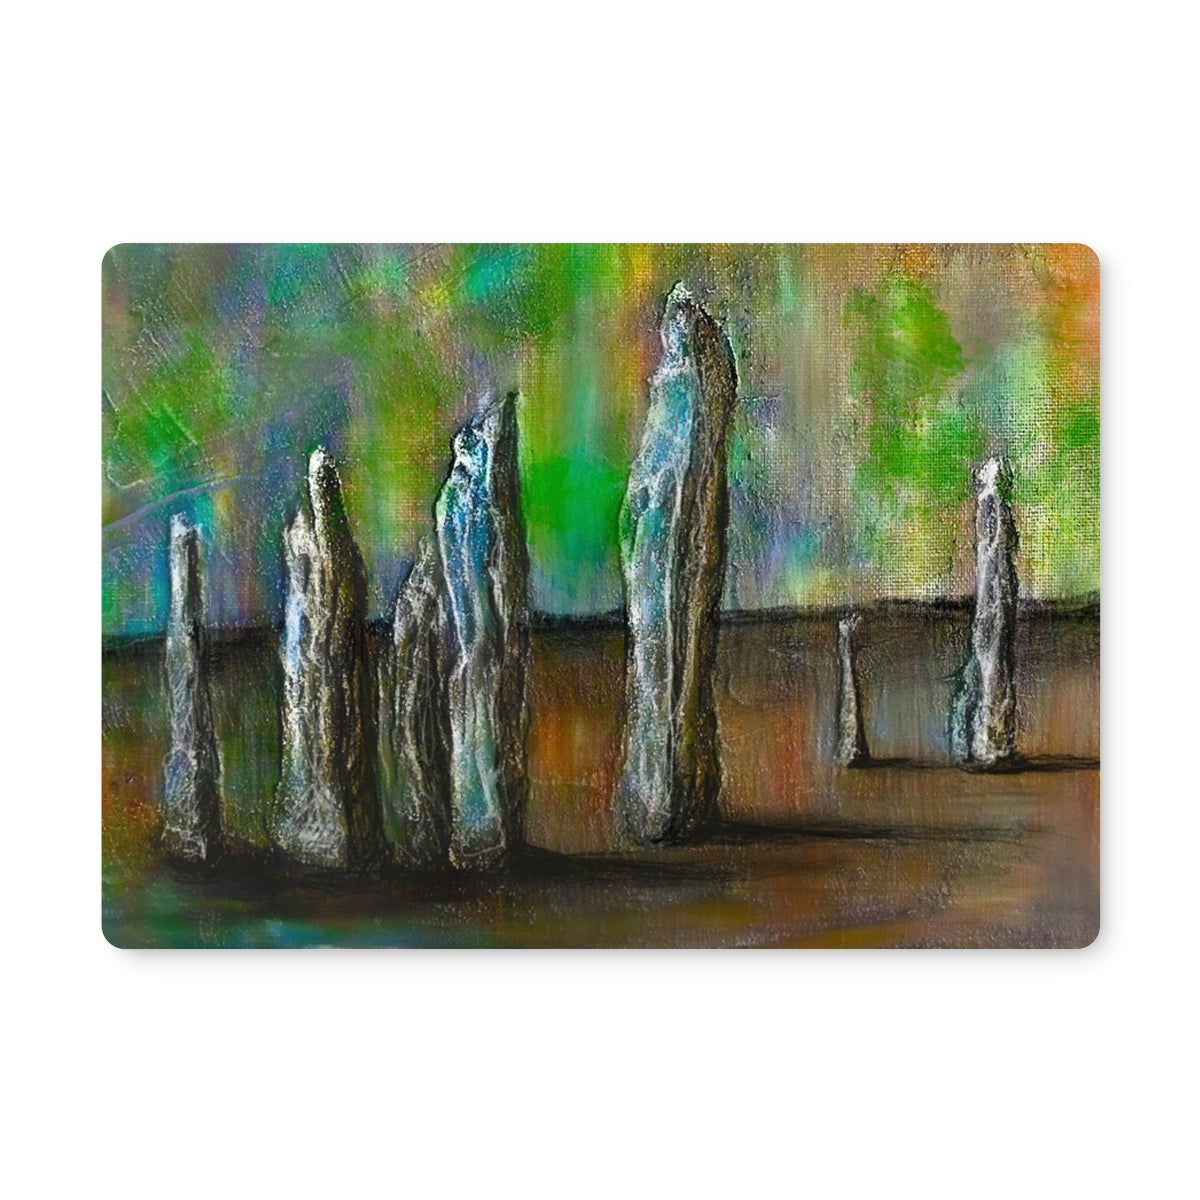 Callanish Northern Lights Art Gifts Placemat-Placemats-Hebridean Islands Art Gallery-2 Placemats-Paintings, Prints, Homeware, Art Gifts From Scotland By Scottish Artist Kevin Hunter